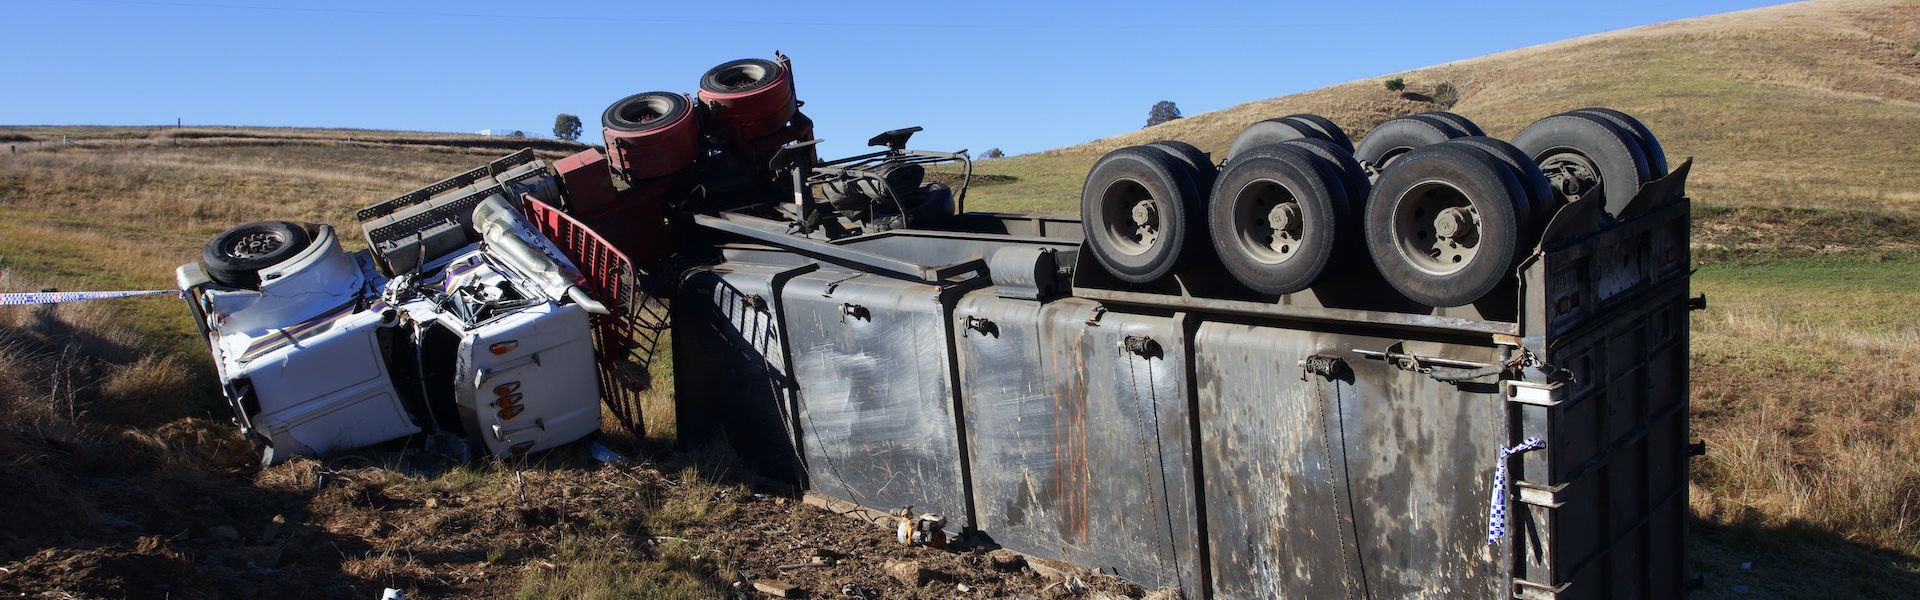 Trucking Accidents in Oklahoma